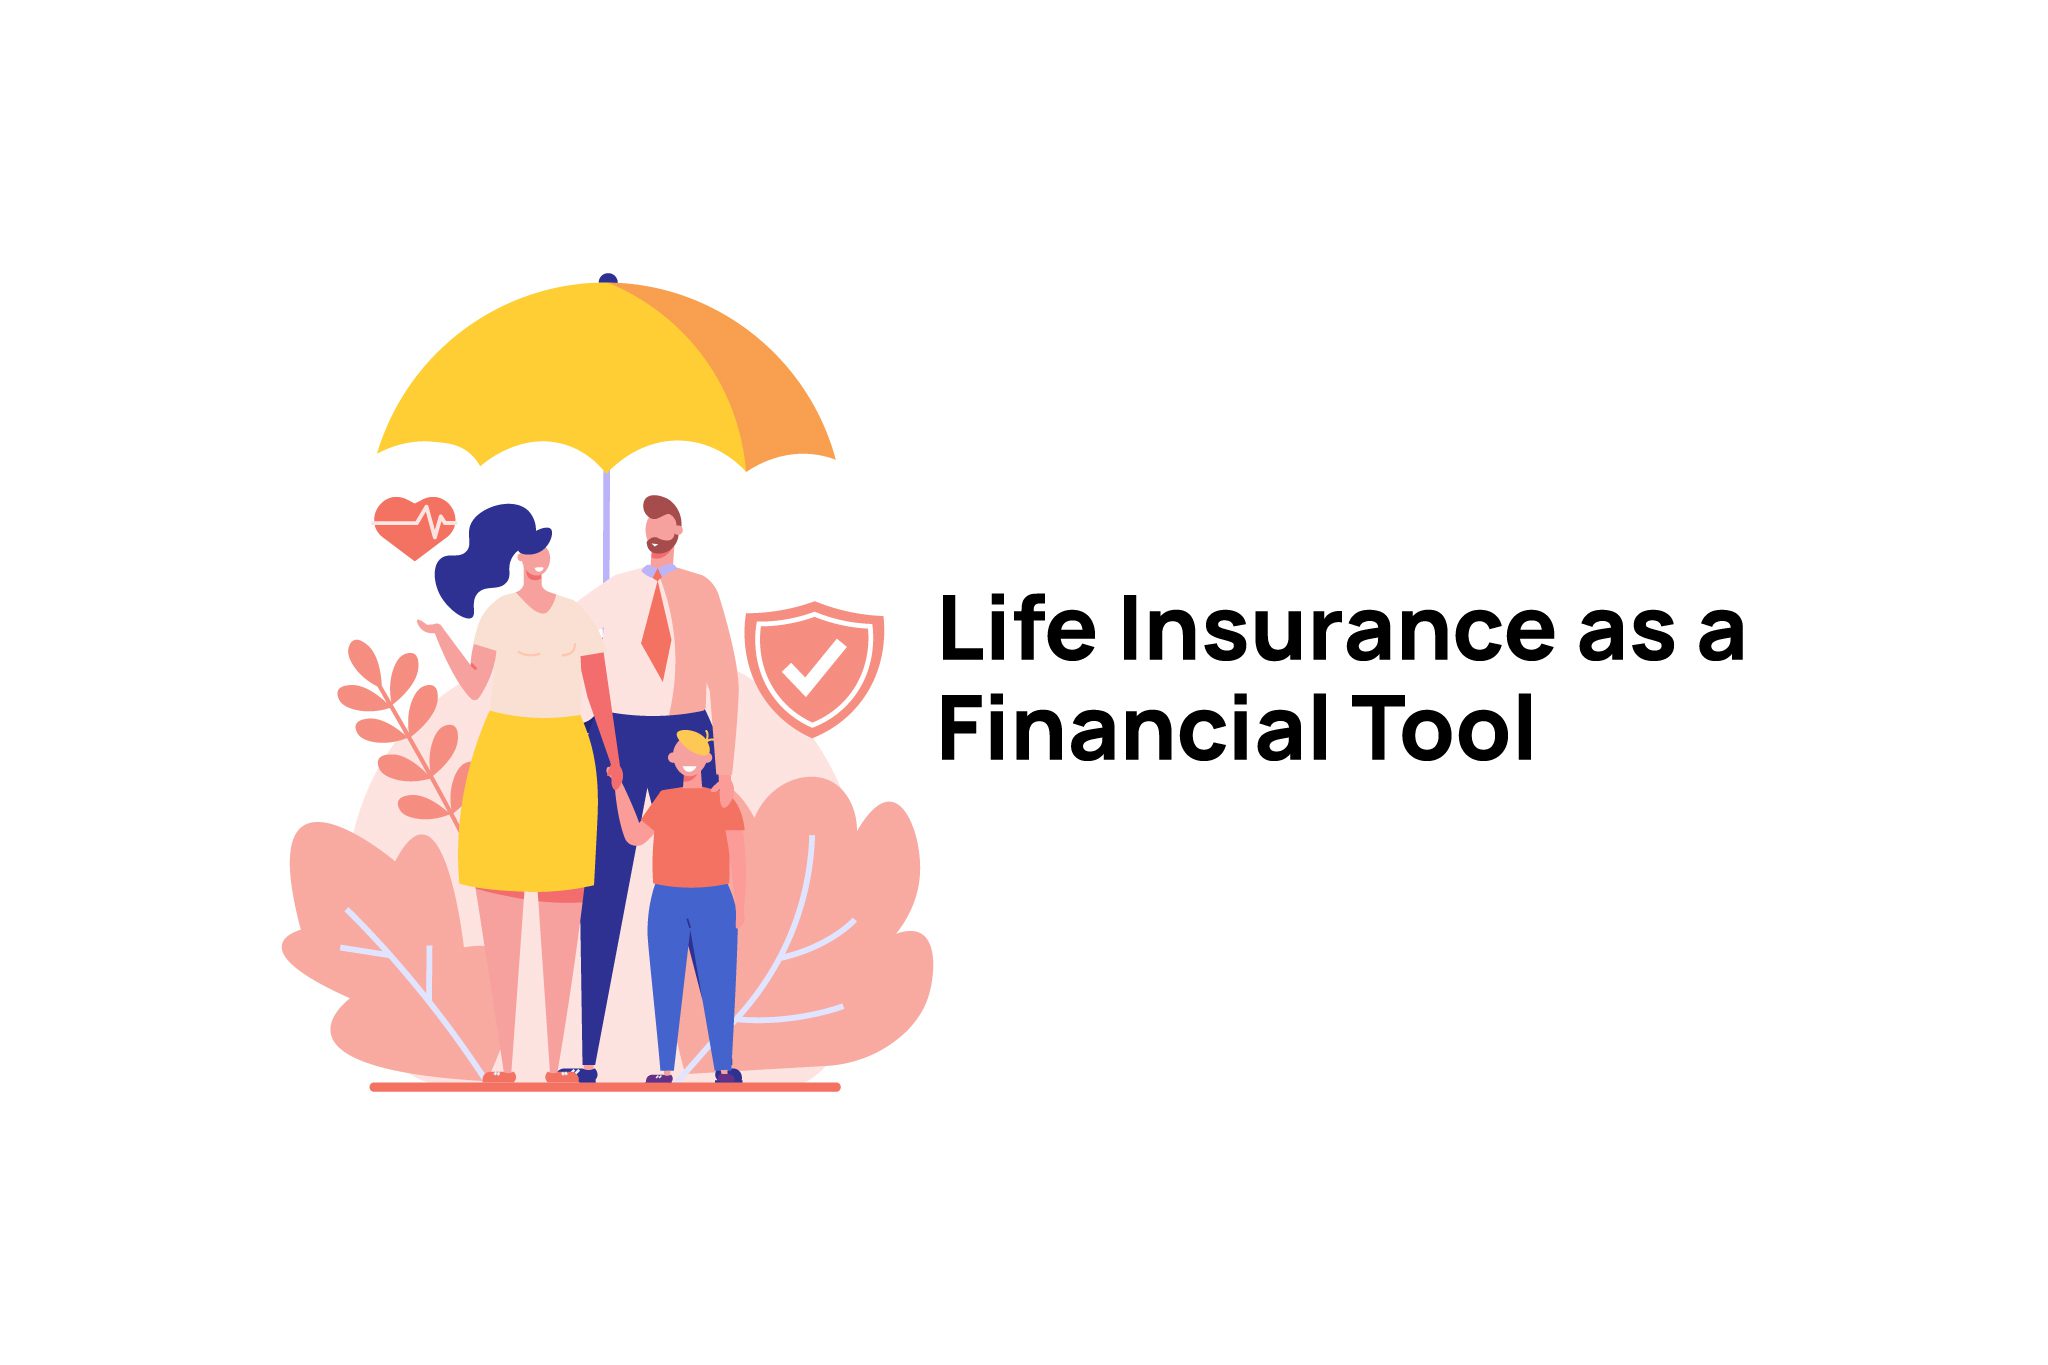 Life Insurance as a Financial Tool